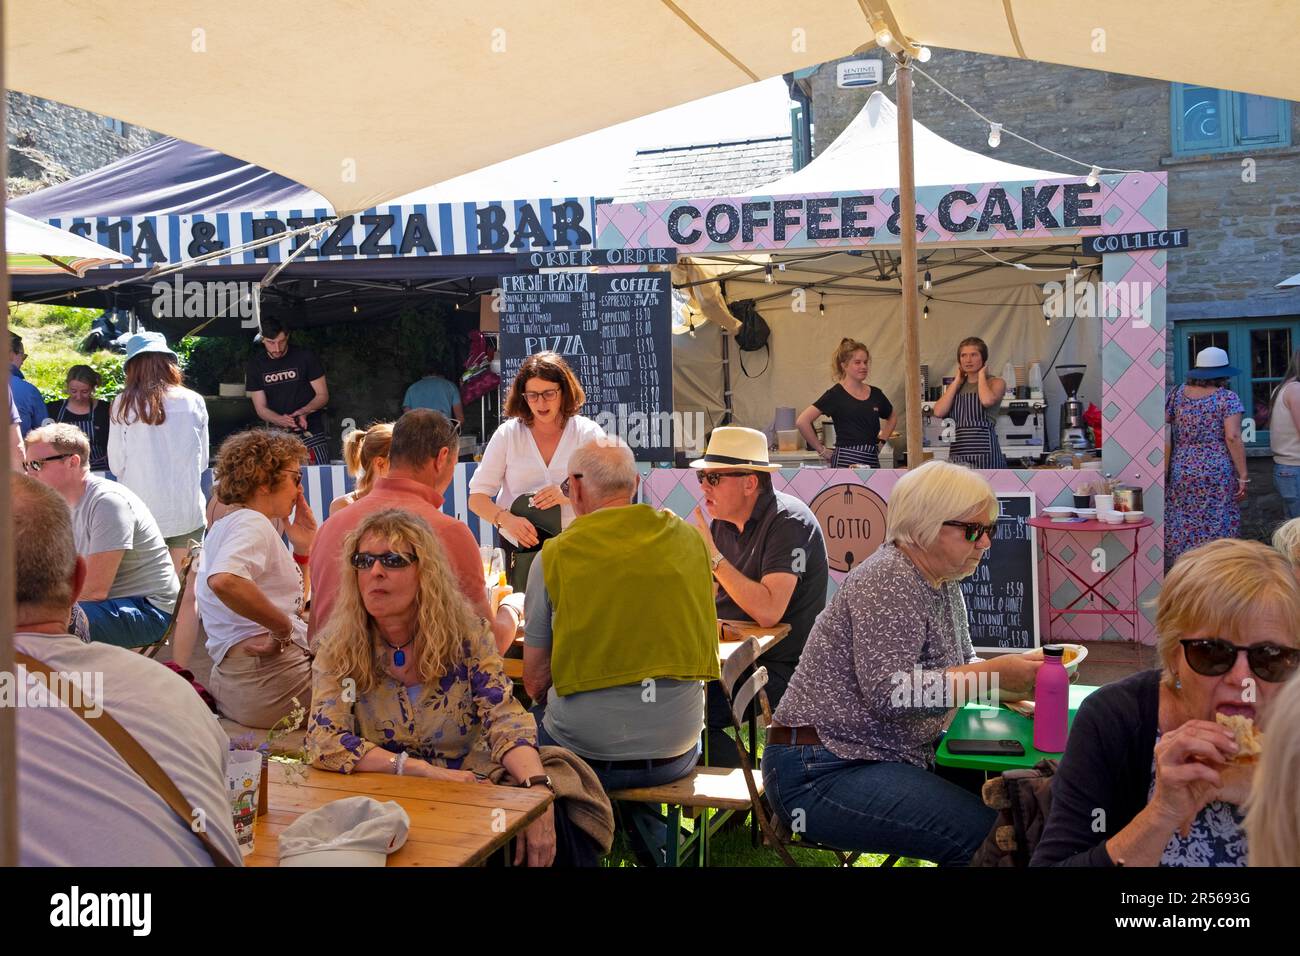 People sitting at Coffee Cake stall and Pizza Bar near Hay Castle in town centre during Hay Book Festival 2023 Hay-on-Wye Wales UK   KATHY DEWITT Stock Photo